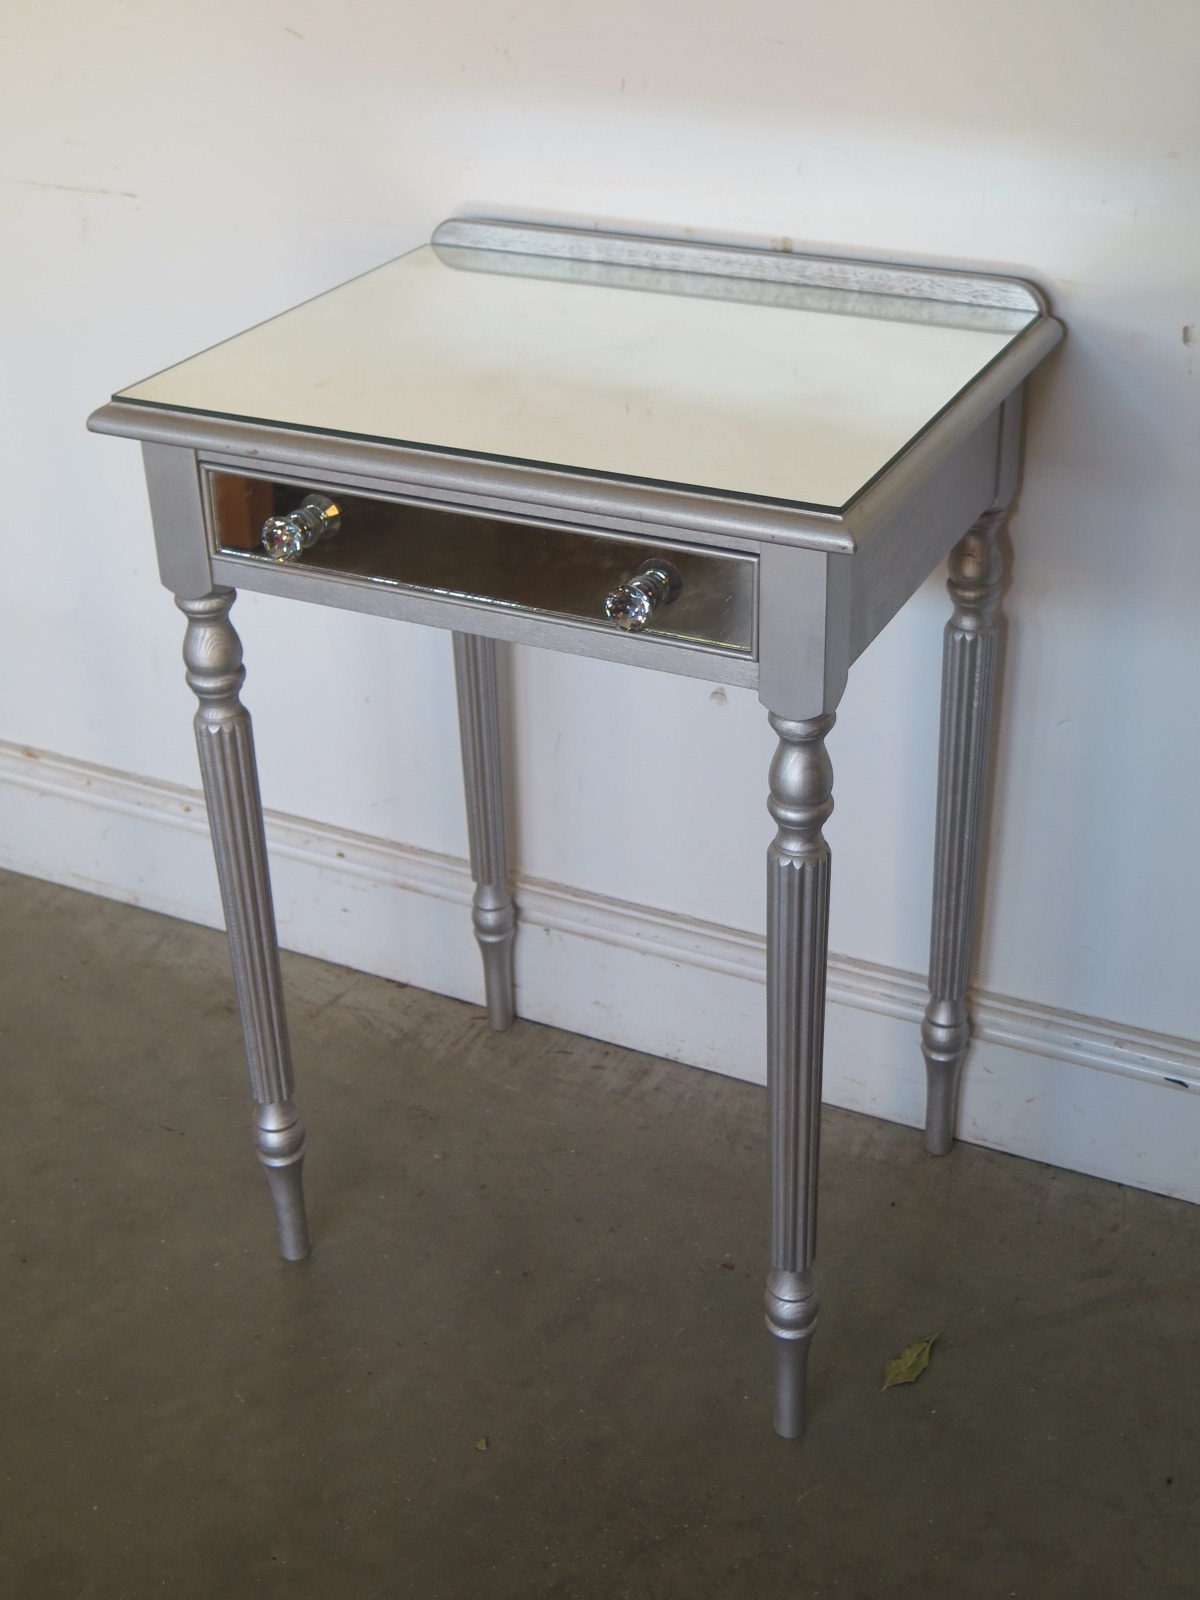 A modern silver side table with a mirrored top - Height 73cm x Width 53cm - in good condition - Image 2 of 2